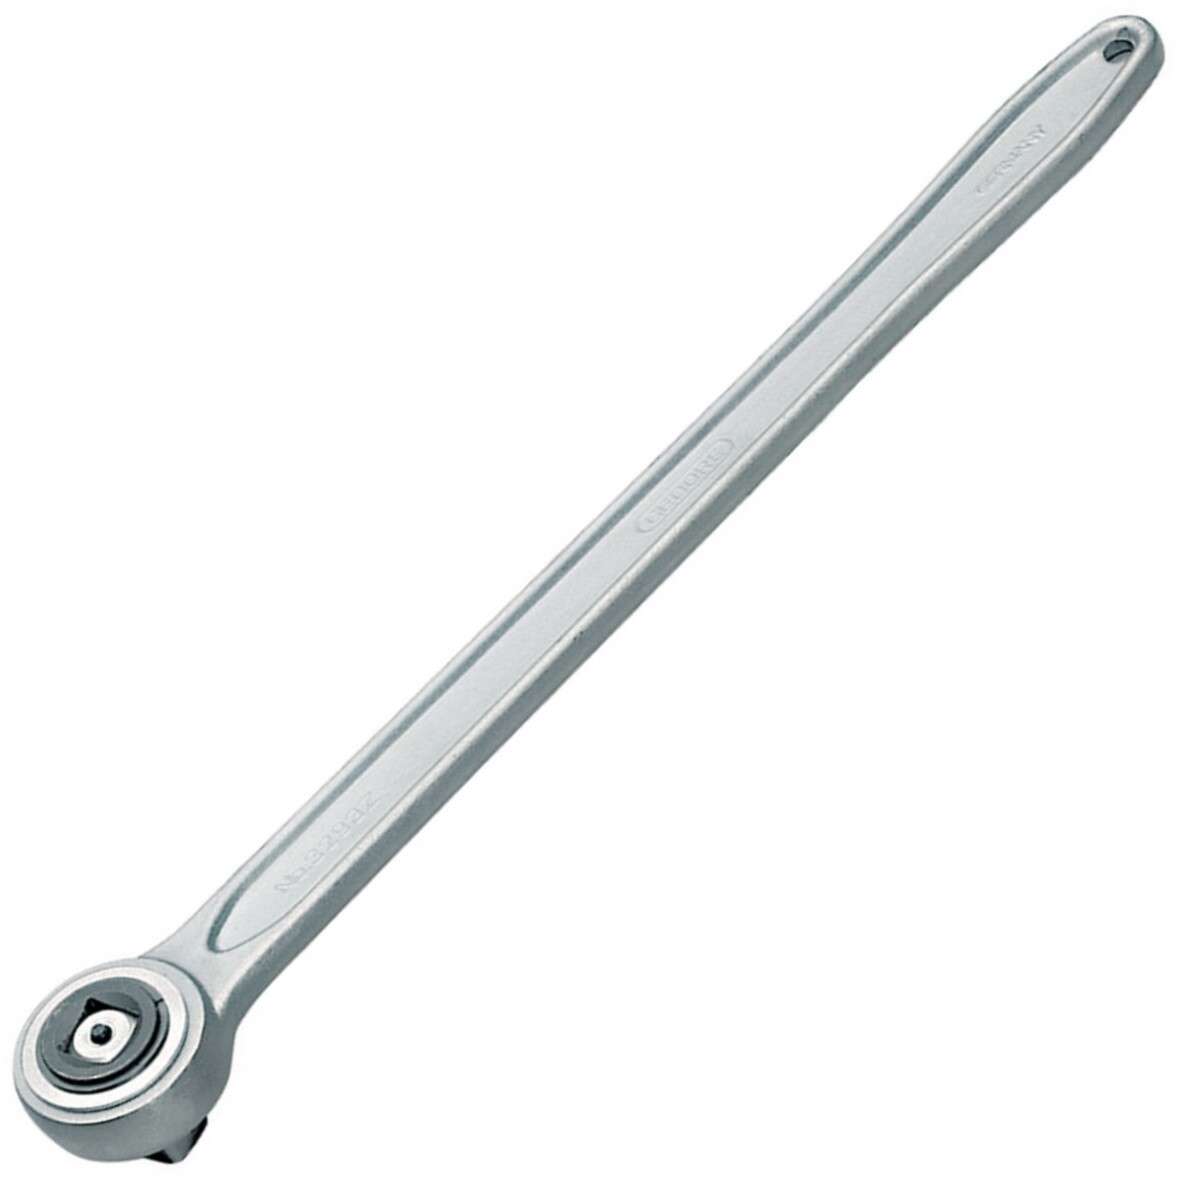 Gedore 6278950 Ratchet Handle with Coupler 3/4